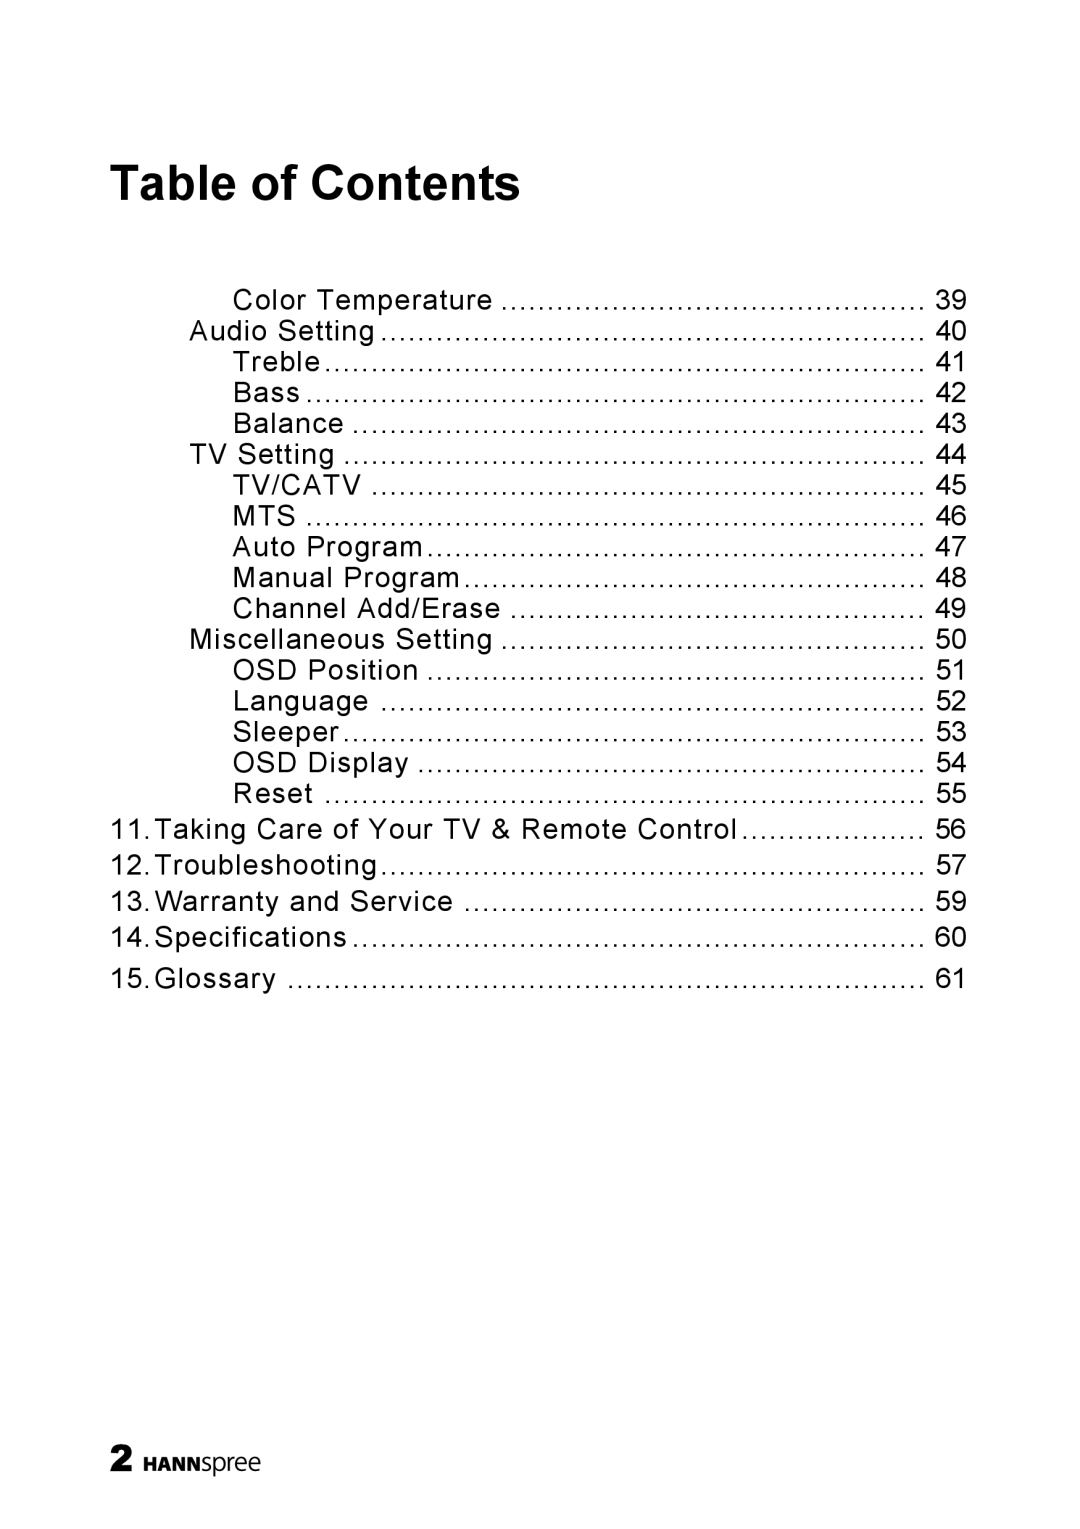 HANNspree HANNSz.crab user manual Table of Contents, Color Temperature 